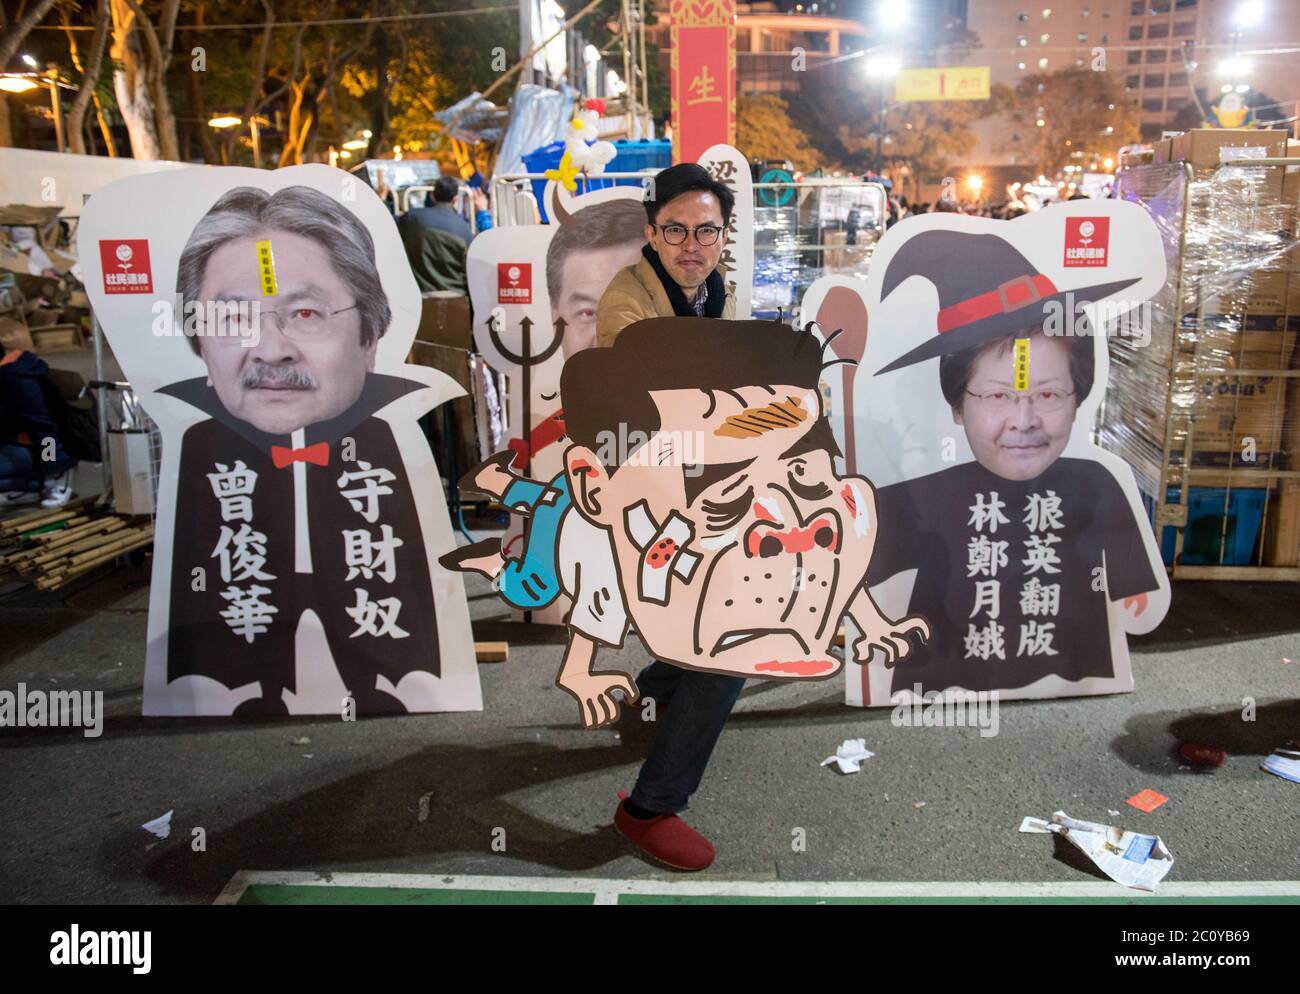 June 12, 2020, Hong Kong, Hong Kong, China: Alongside the Lunar New Year flower stalls, political parties also rent stalls to get their message across.Hong Kong politician and chairman of the League of Social Democrats (LSD), AVERY NG MAN-YUEN holds caricature cardboard cutouts of the candidates for the upcoming election for the Hong Kong Chief Executive.Each candidate is regarded as Pro-Beijing as the election only allows for democratic vote from a Beijing CCP pre-approved list.L to R John Tsang, C.Y.Leung (Leung Chun-ying) and Carrie Lam(as C.Y.Leung lookalike).Ng is holding C.Y.Leung. (Cre Stock Photo